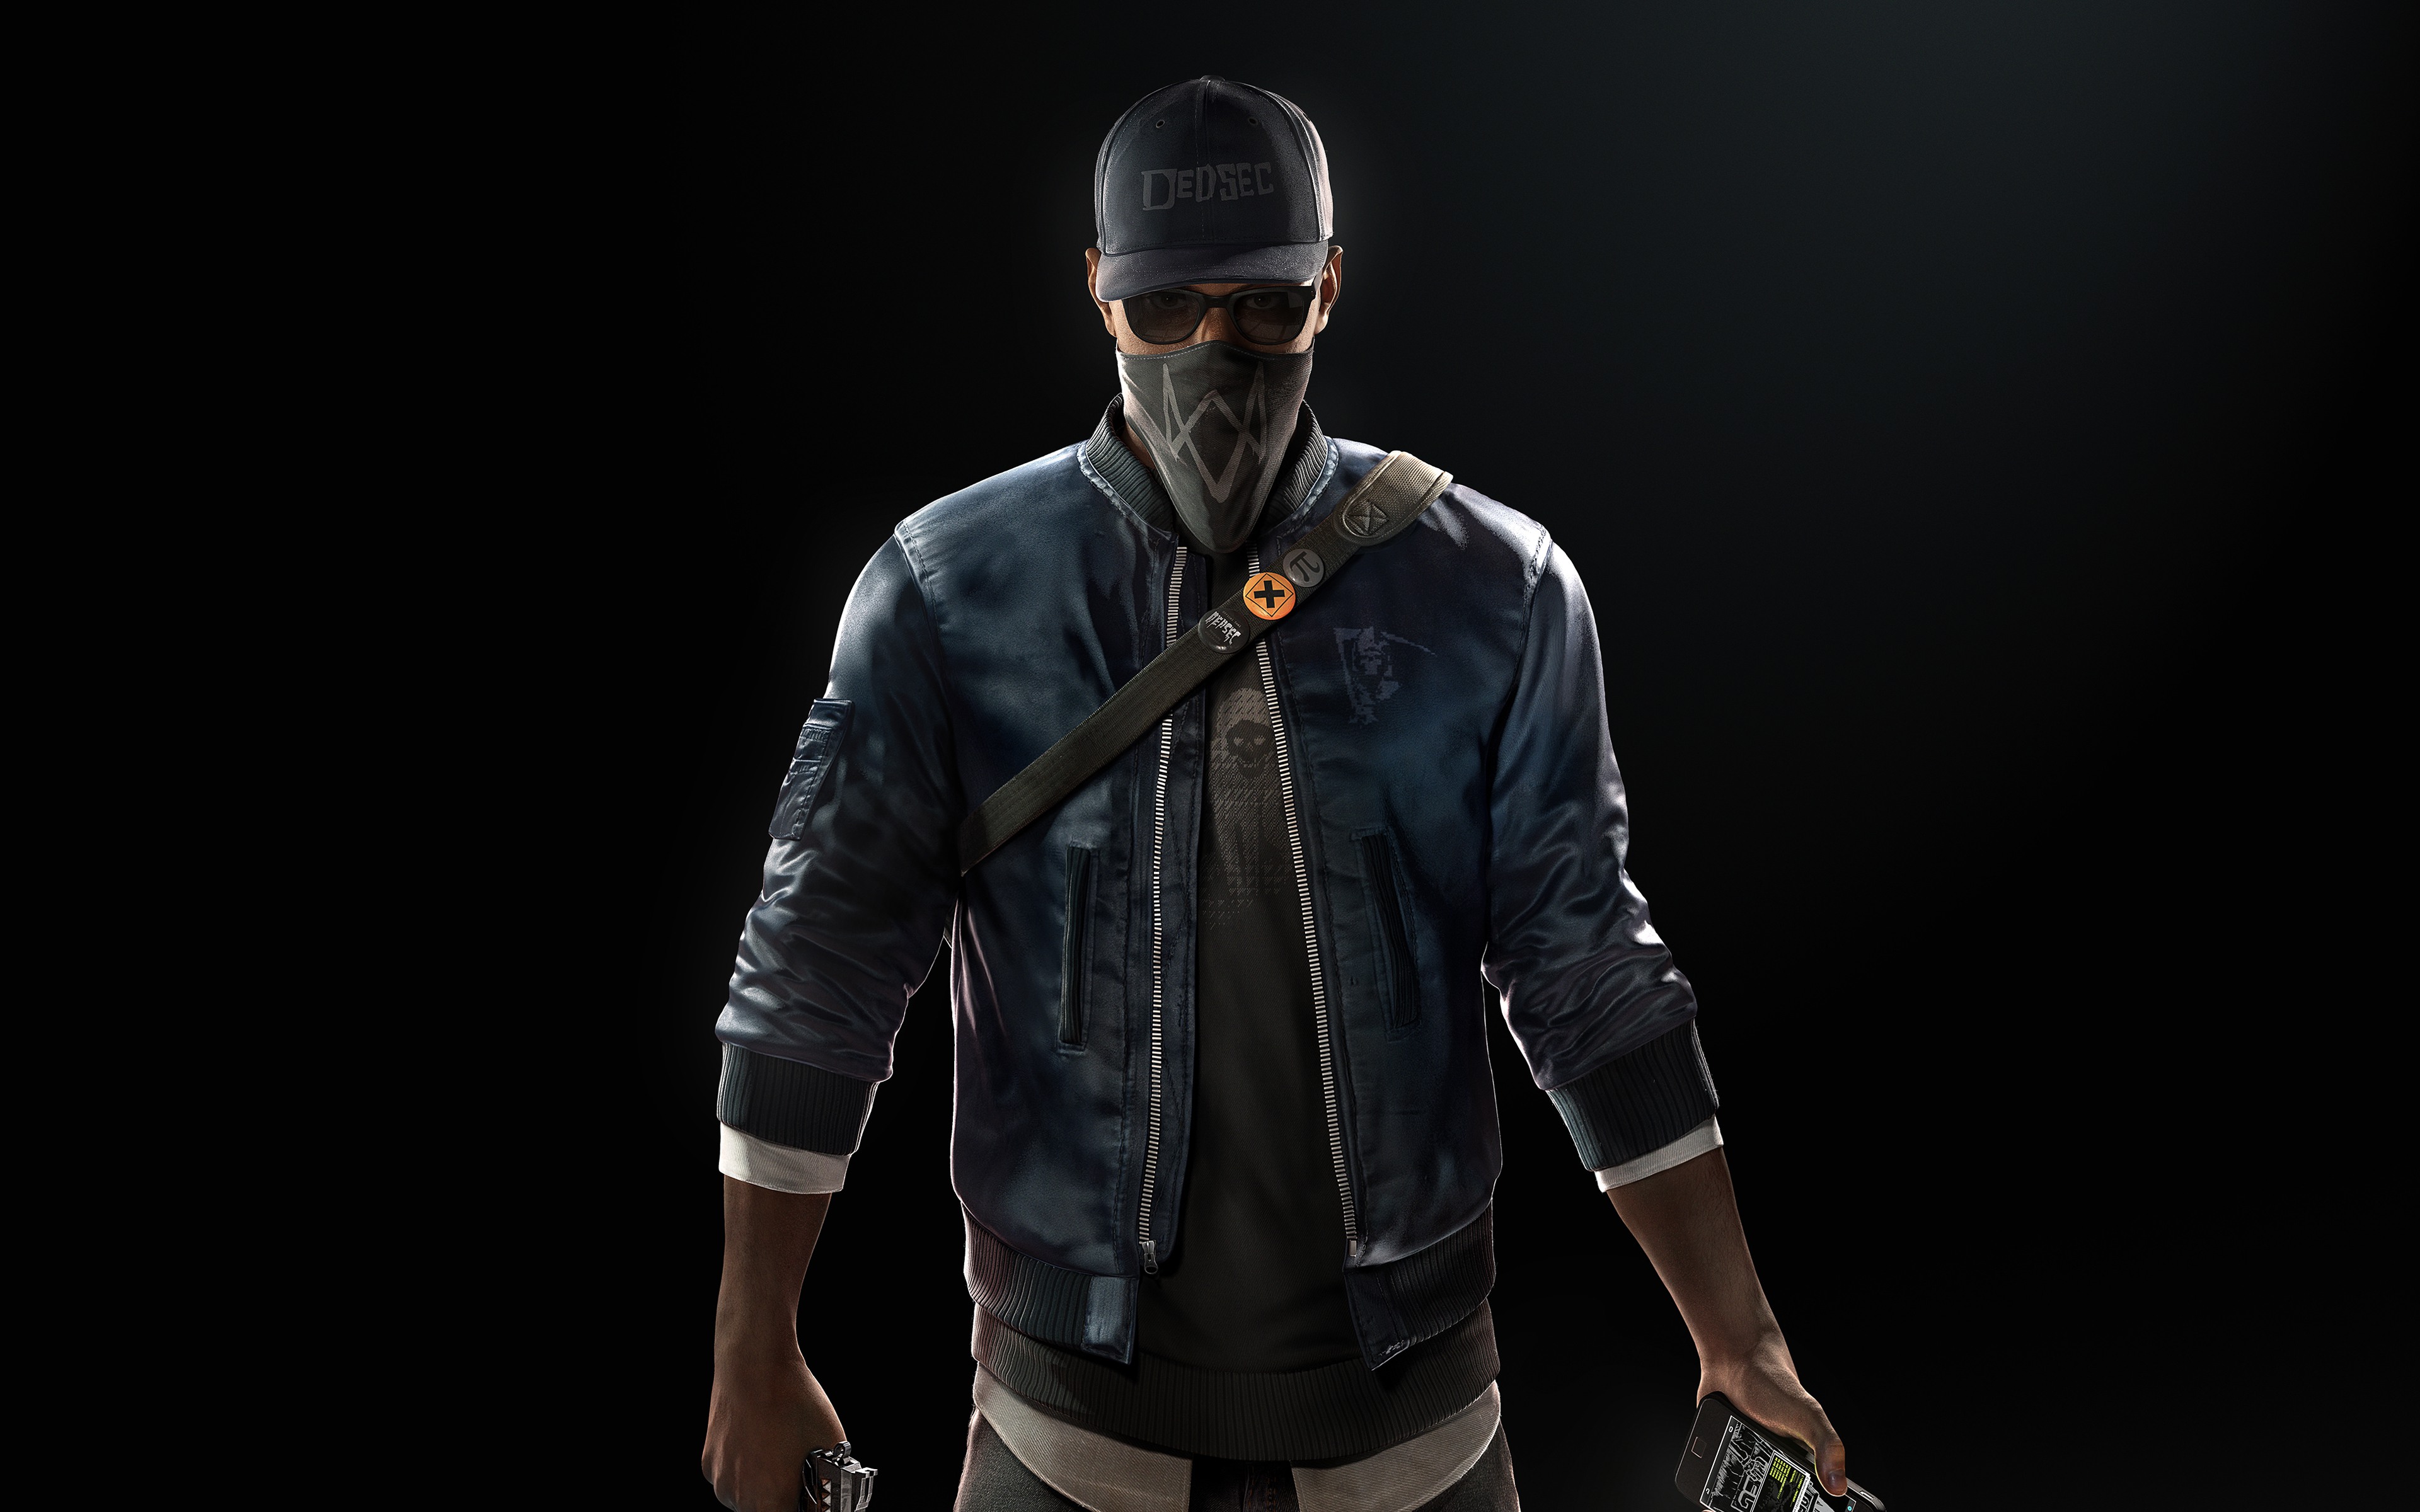 watch dogs, watch dogs 2, video game, marcus holloway